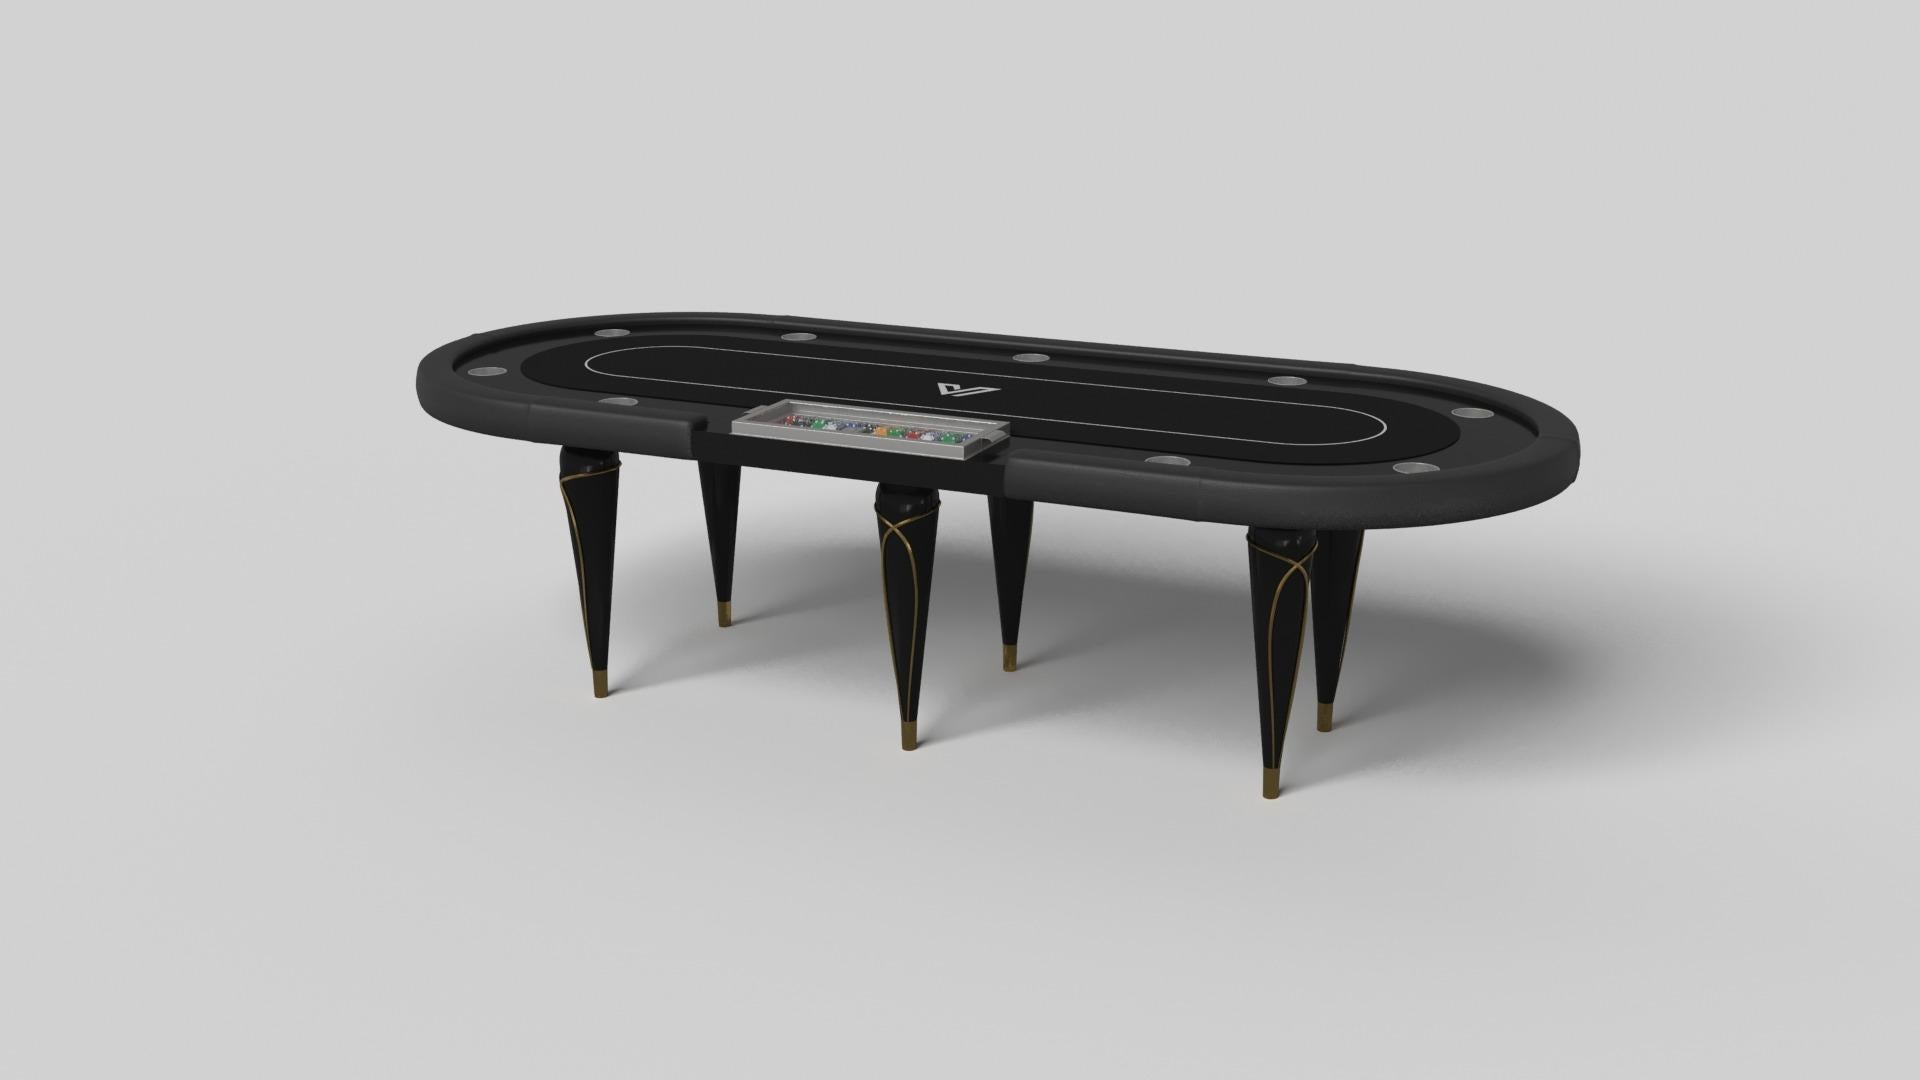 Champagne gold accents add undeniable elegance to this luxury poker table. Offering superior playability and uncompromised style, this design features hand carved details, decorative metal elements, and metal sabots at the bottom of each leg. The